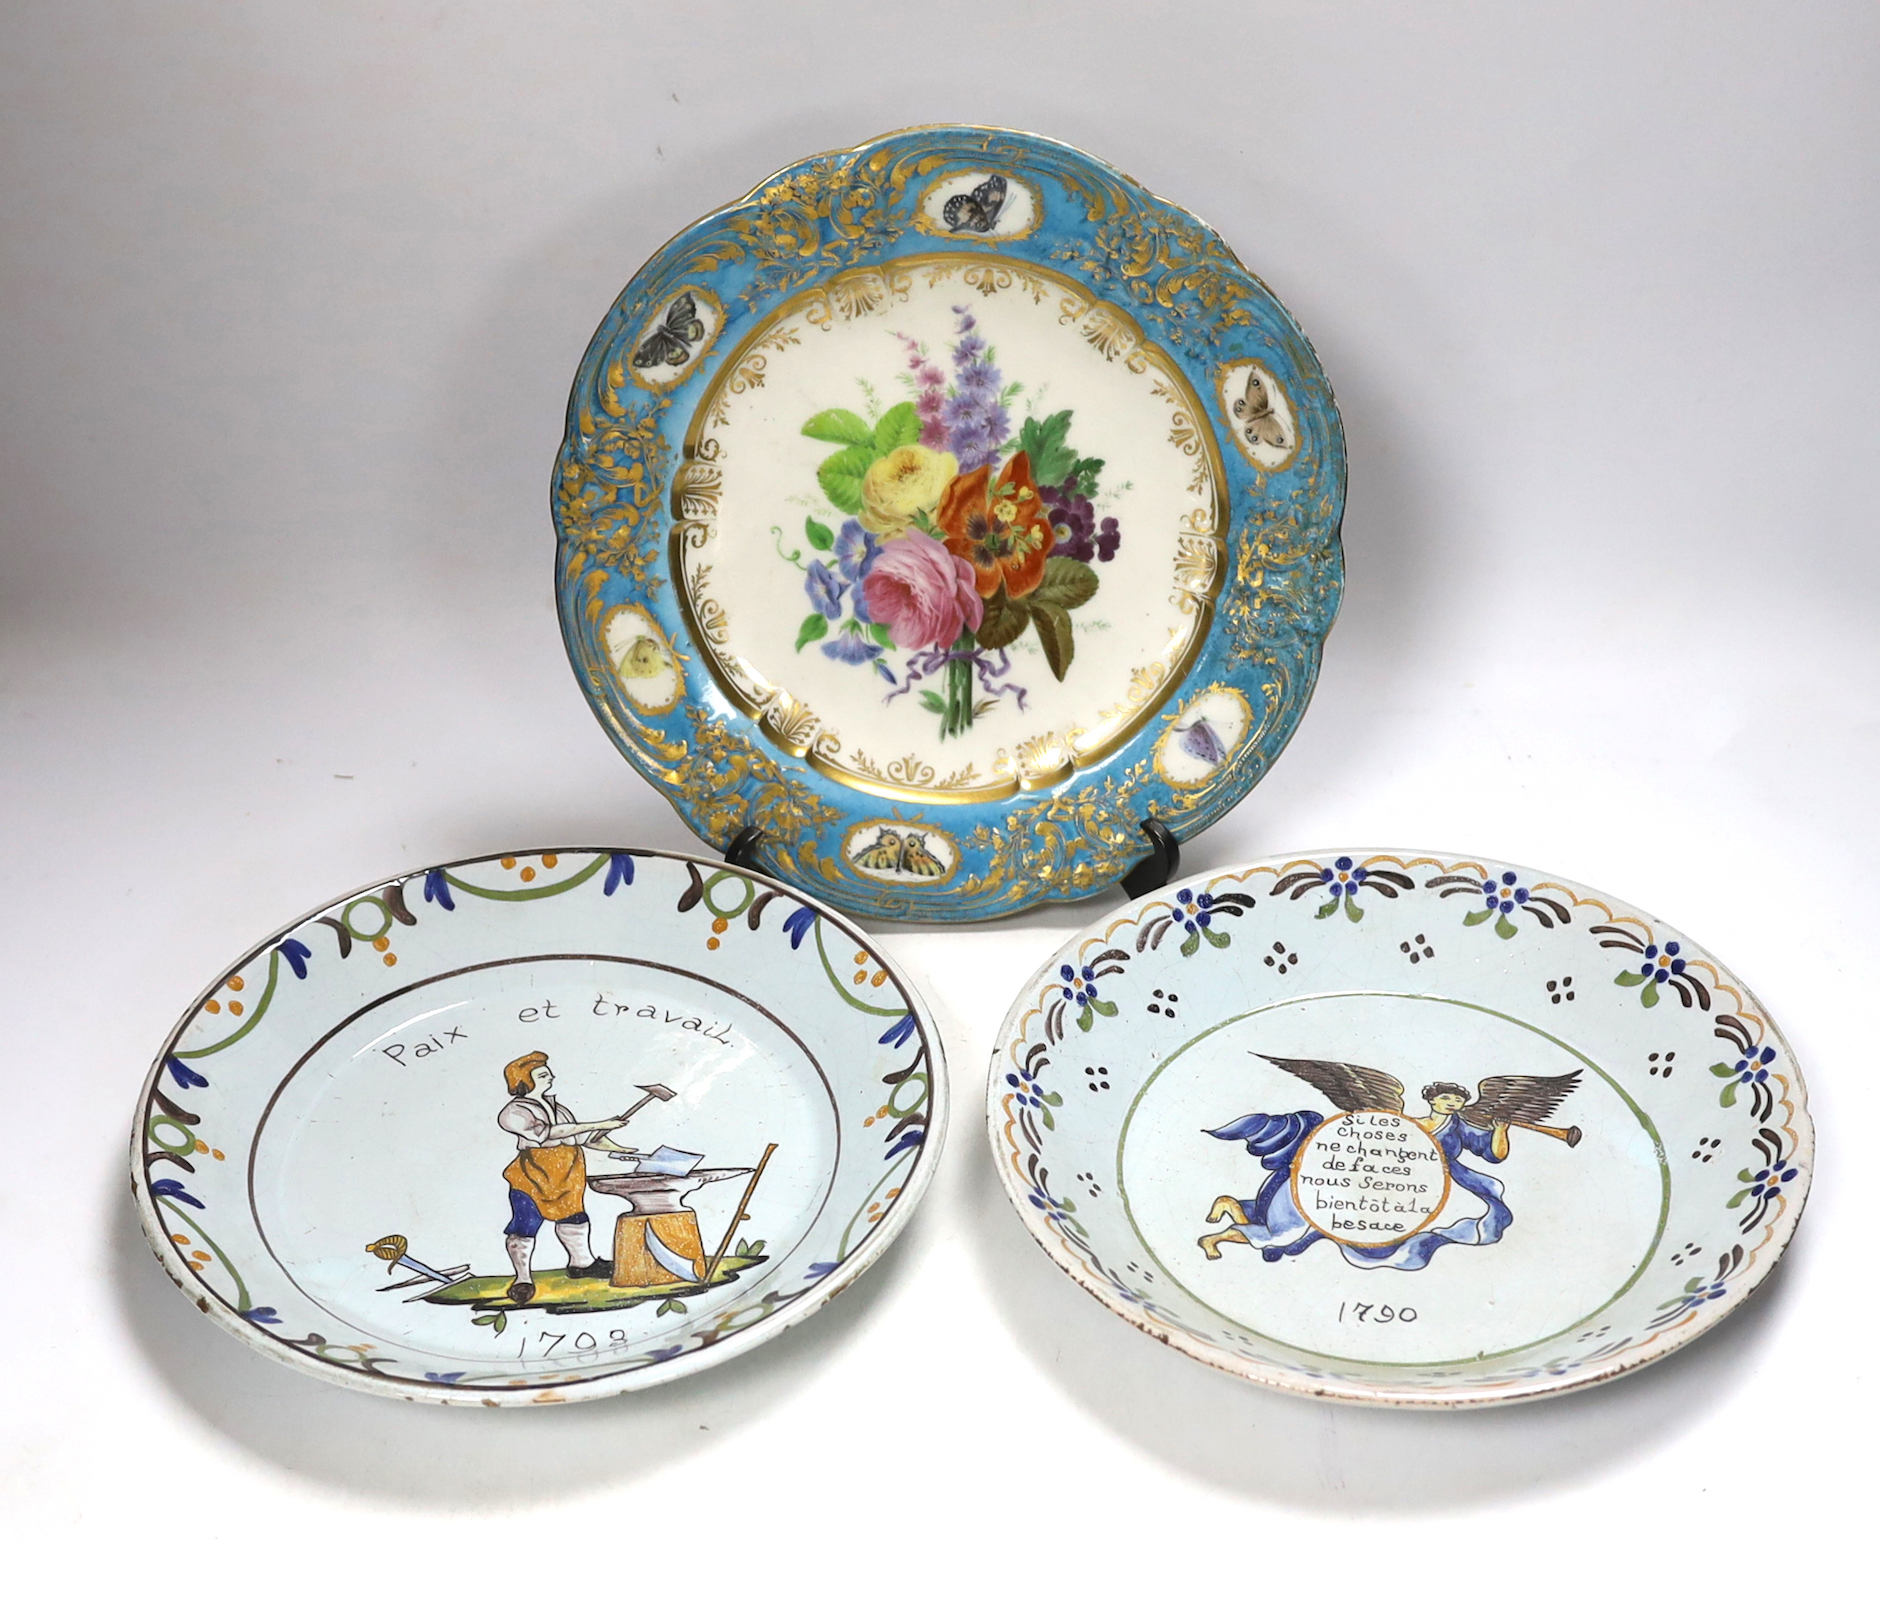 A pair of French revolution commemorative faience dishes and an 18th century Sevres plate, with later decoration, largest 23cm in diameter